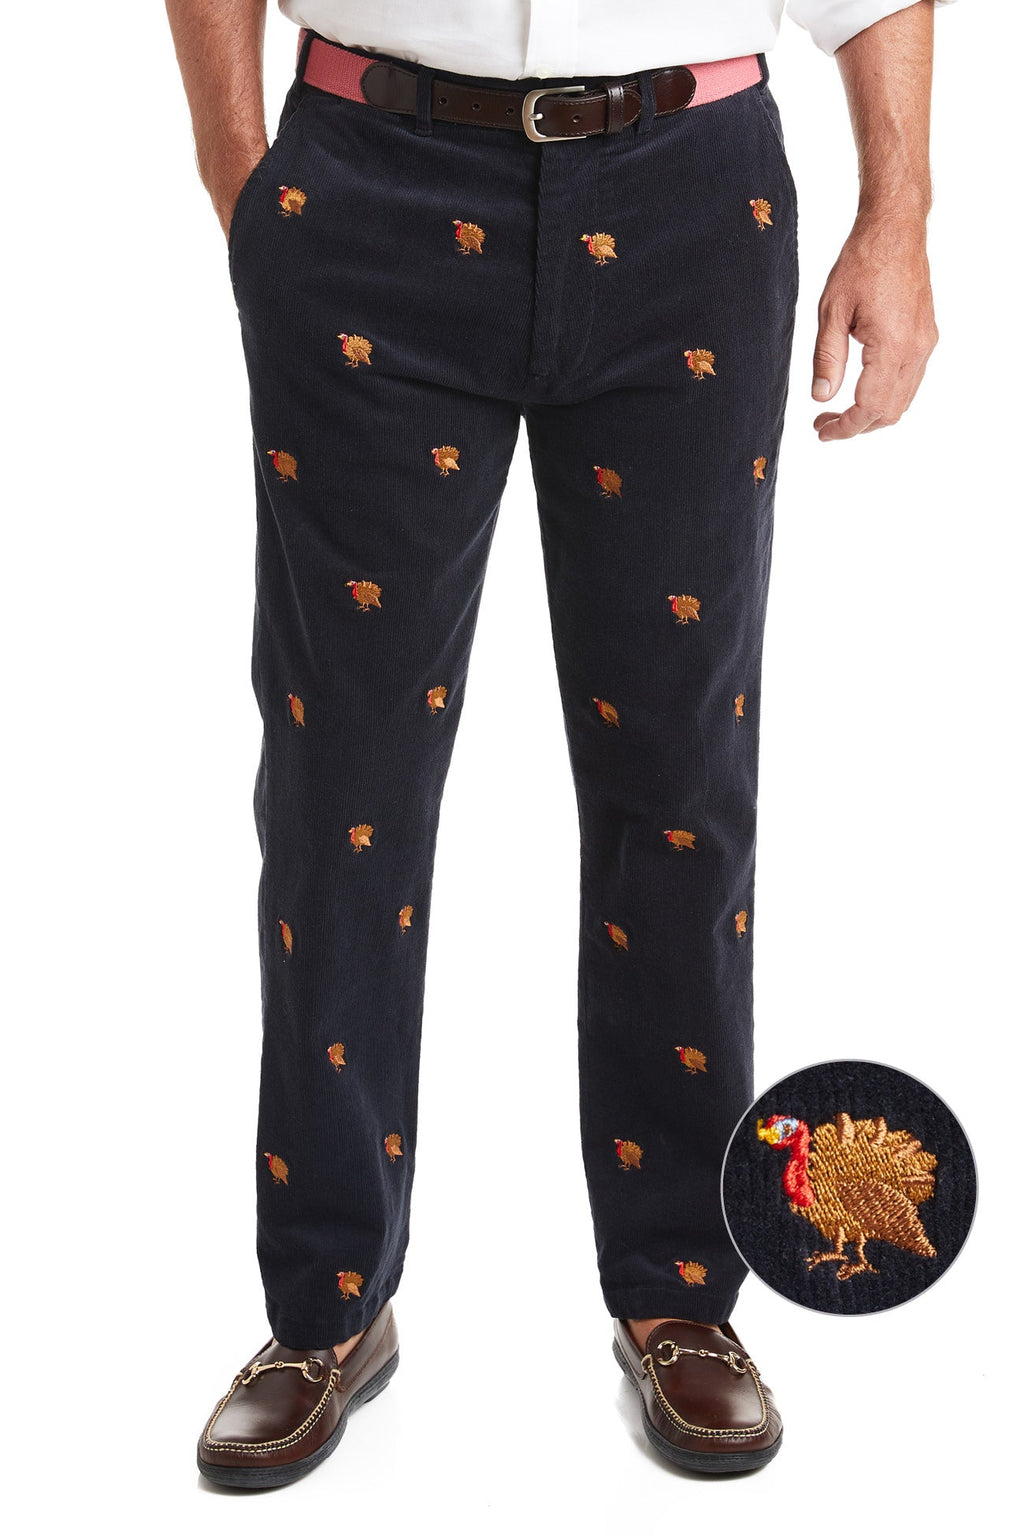 Beachcomber Corduroy Pant Nantucket Navy with Turkey MENS EMBROIDERED ...